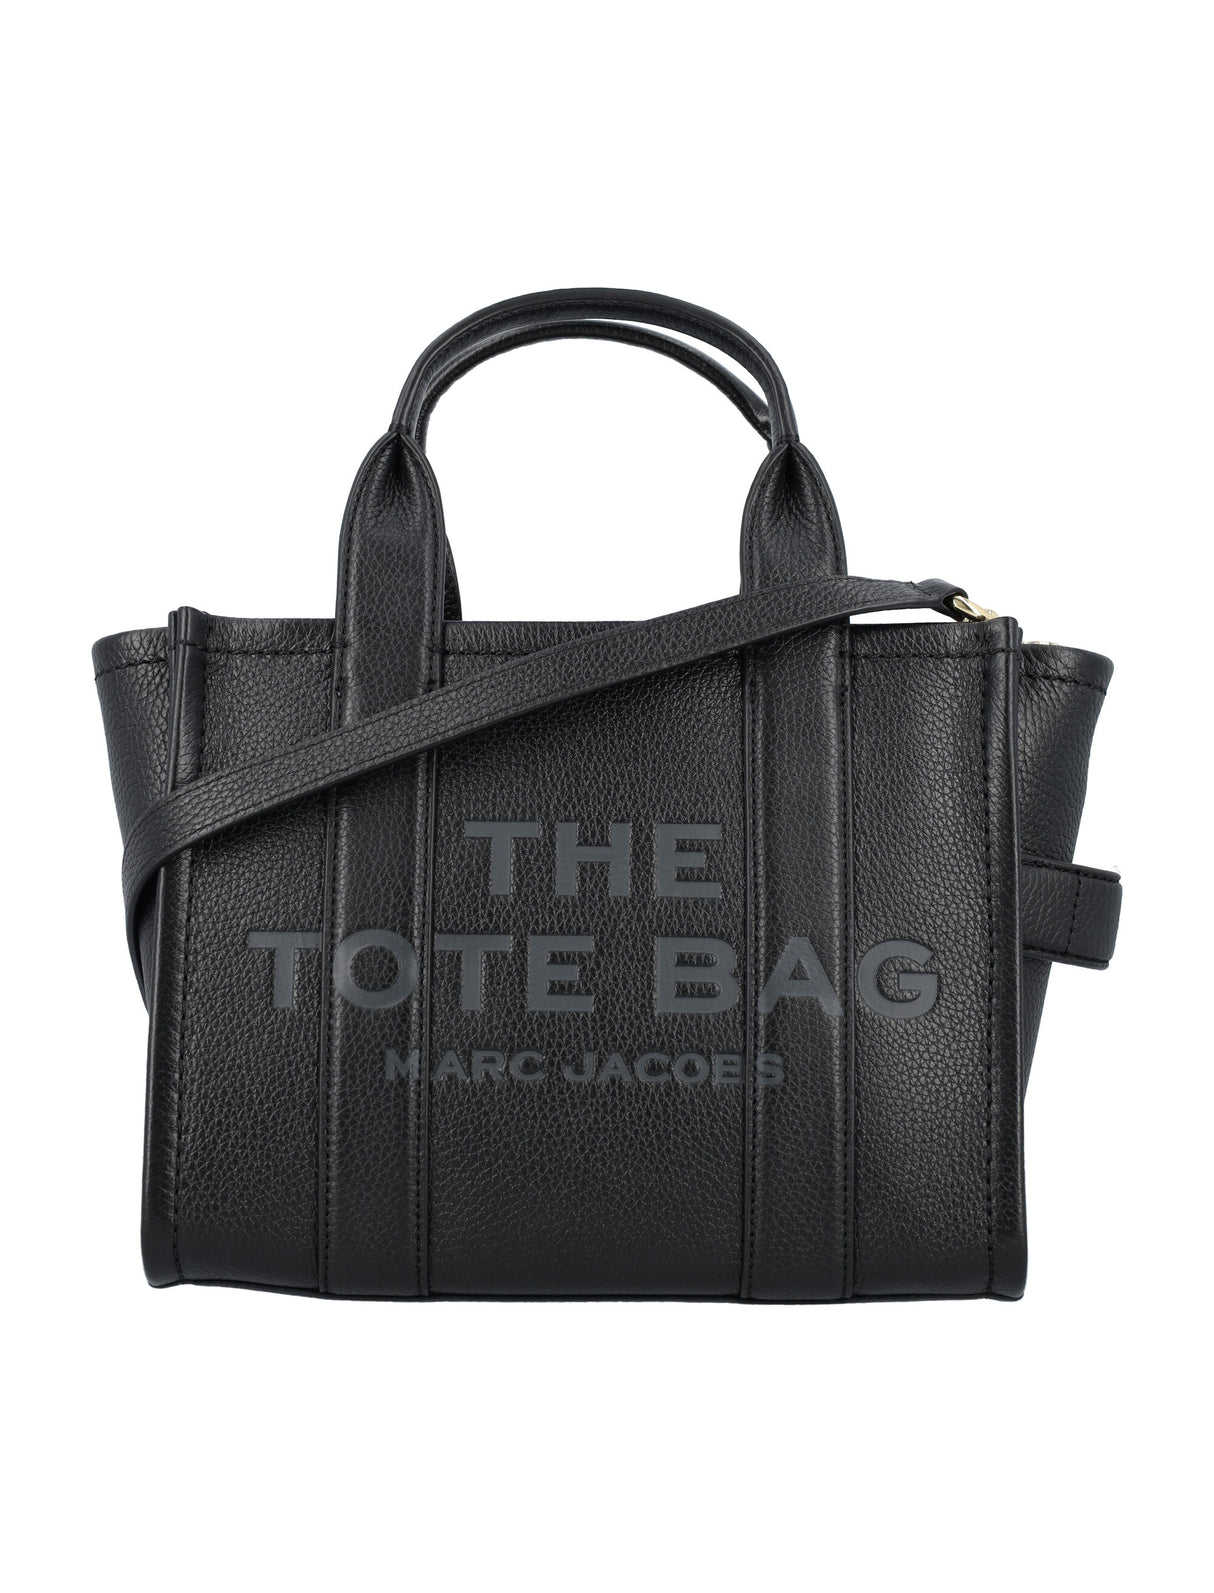 MARC JACOBS Black Grained Leather Mini Tote Handbag with Silver-Tone Accents and Removable Strap